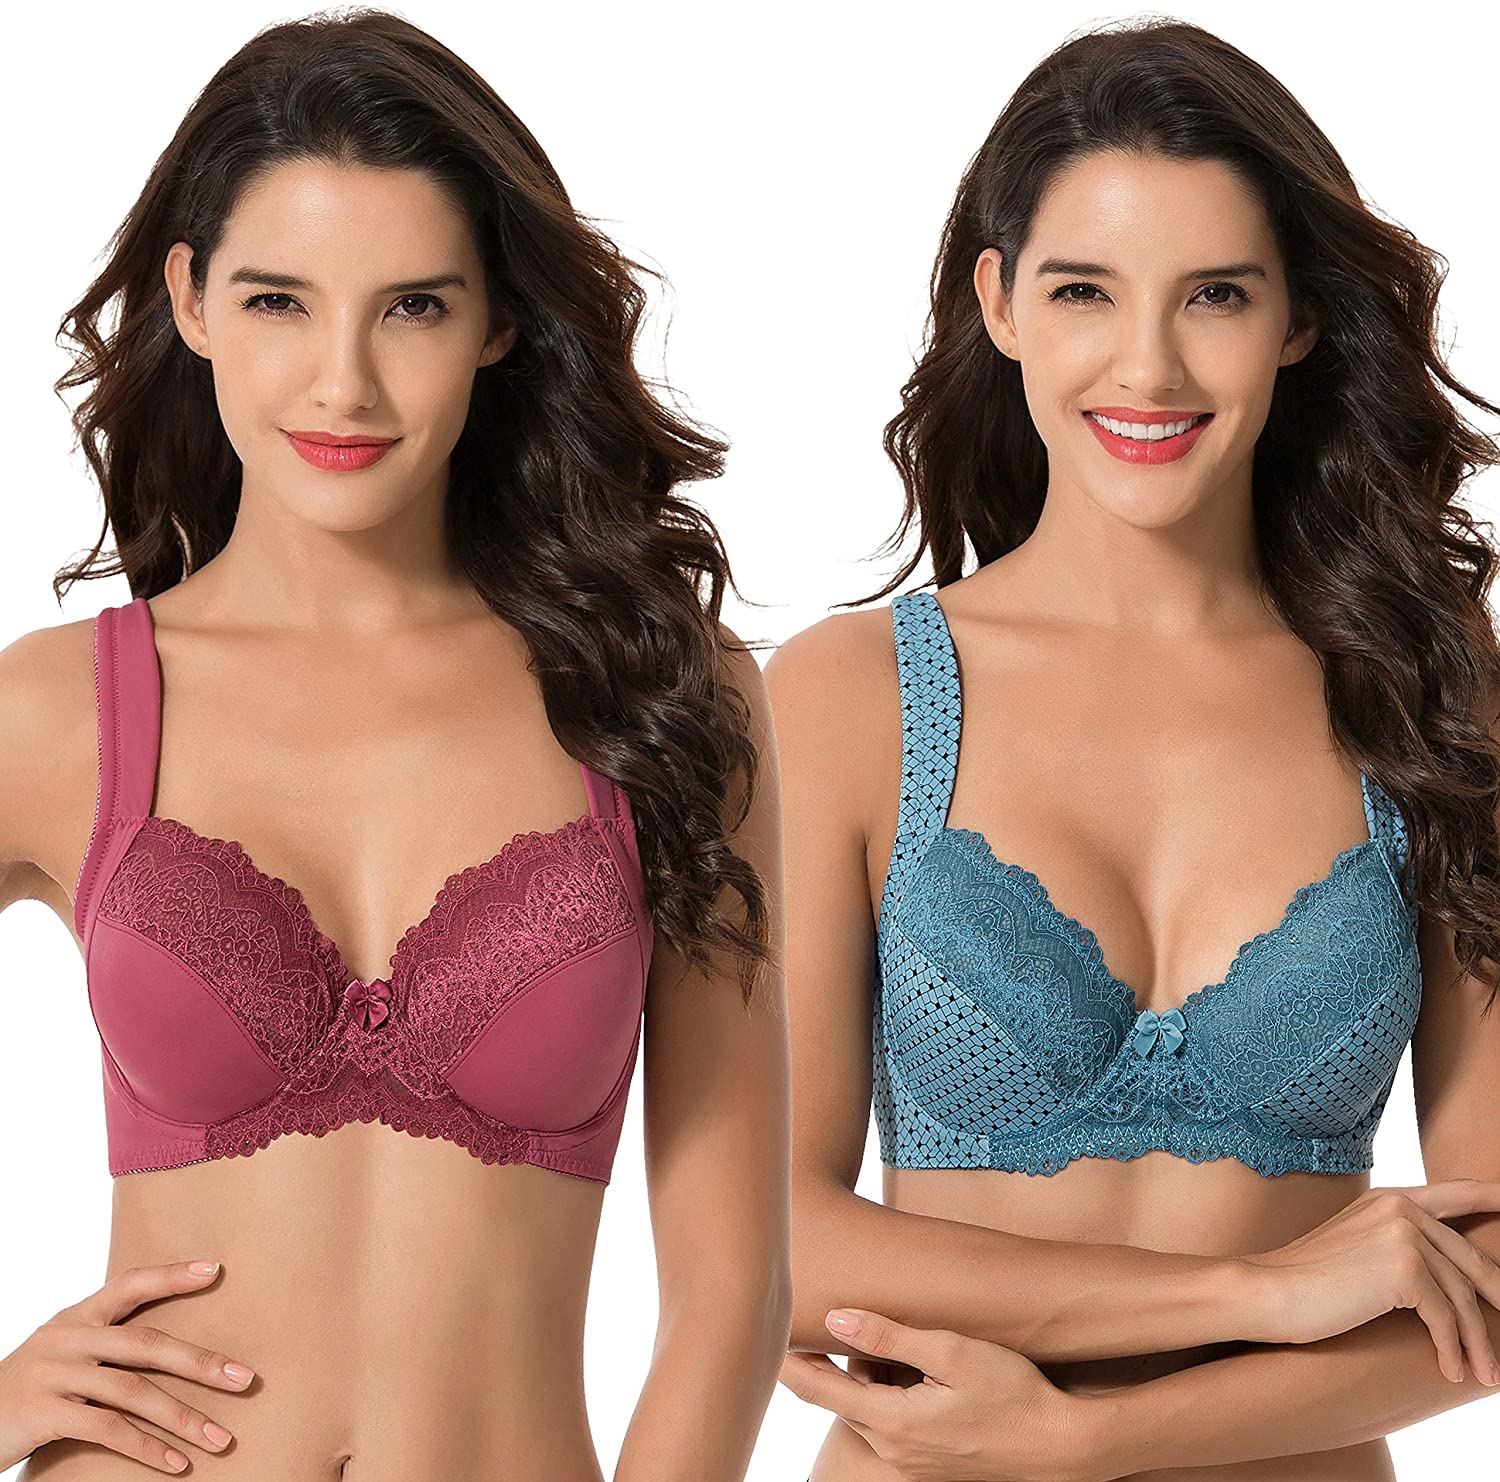 Curve Muse Women's Plus Size Underwire Add 1+ Cup Push Up Mesh Lace Bra-2PK-Teal,Mimosa-42DD  